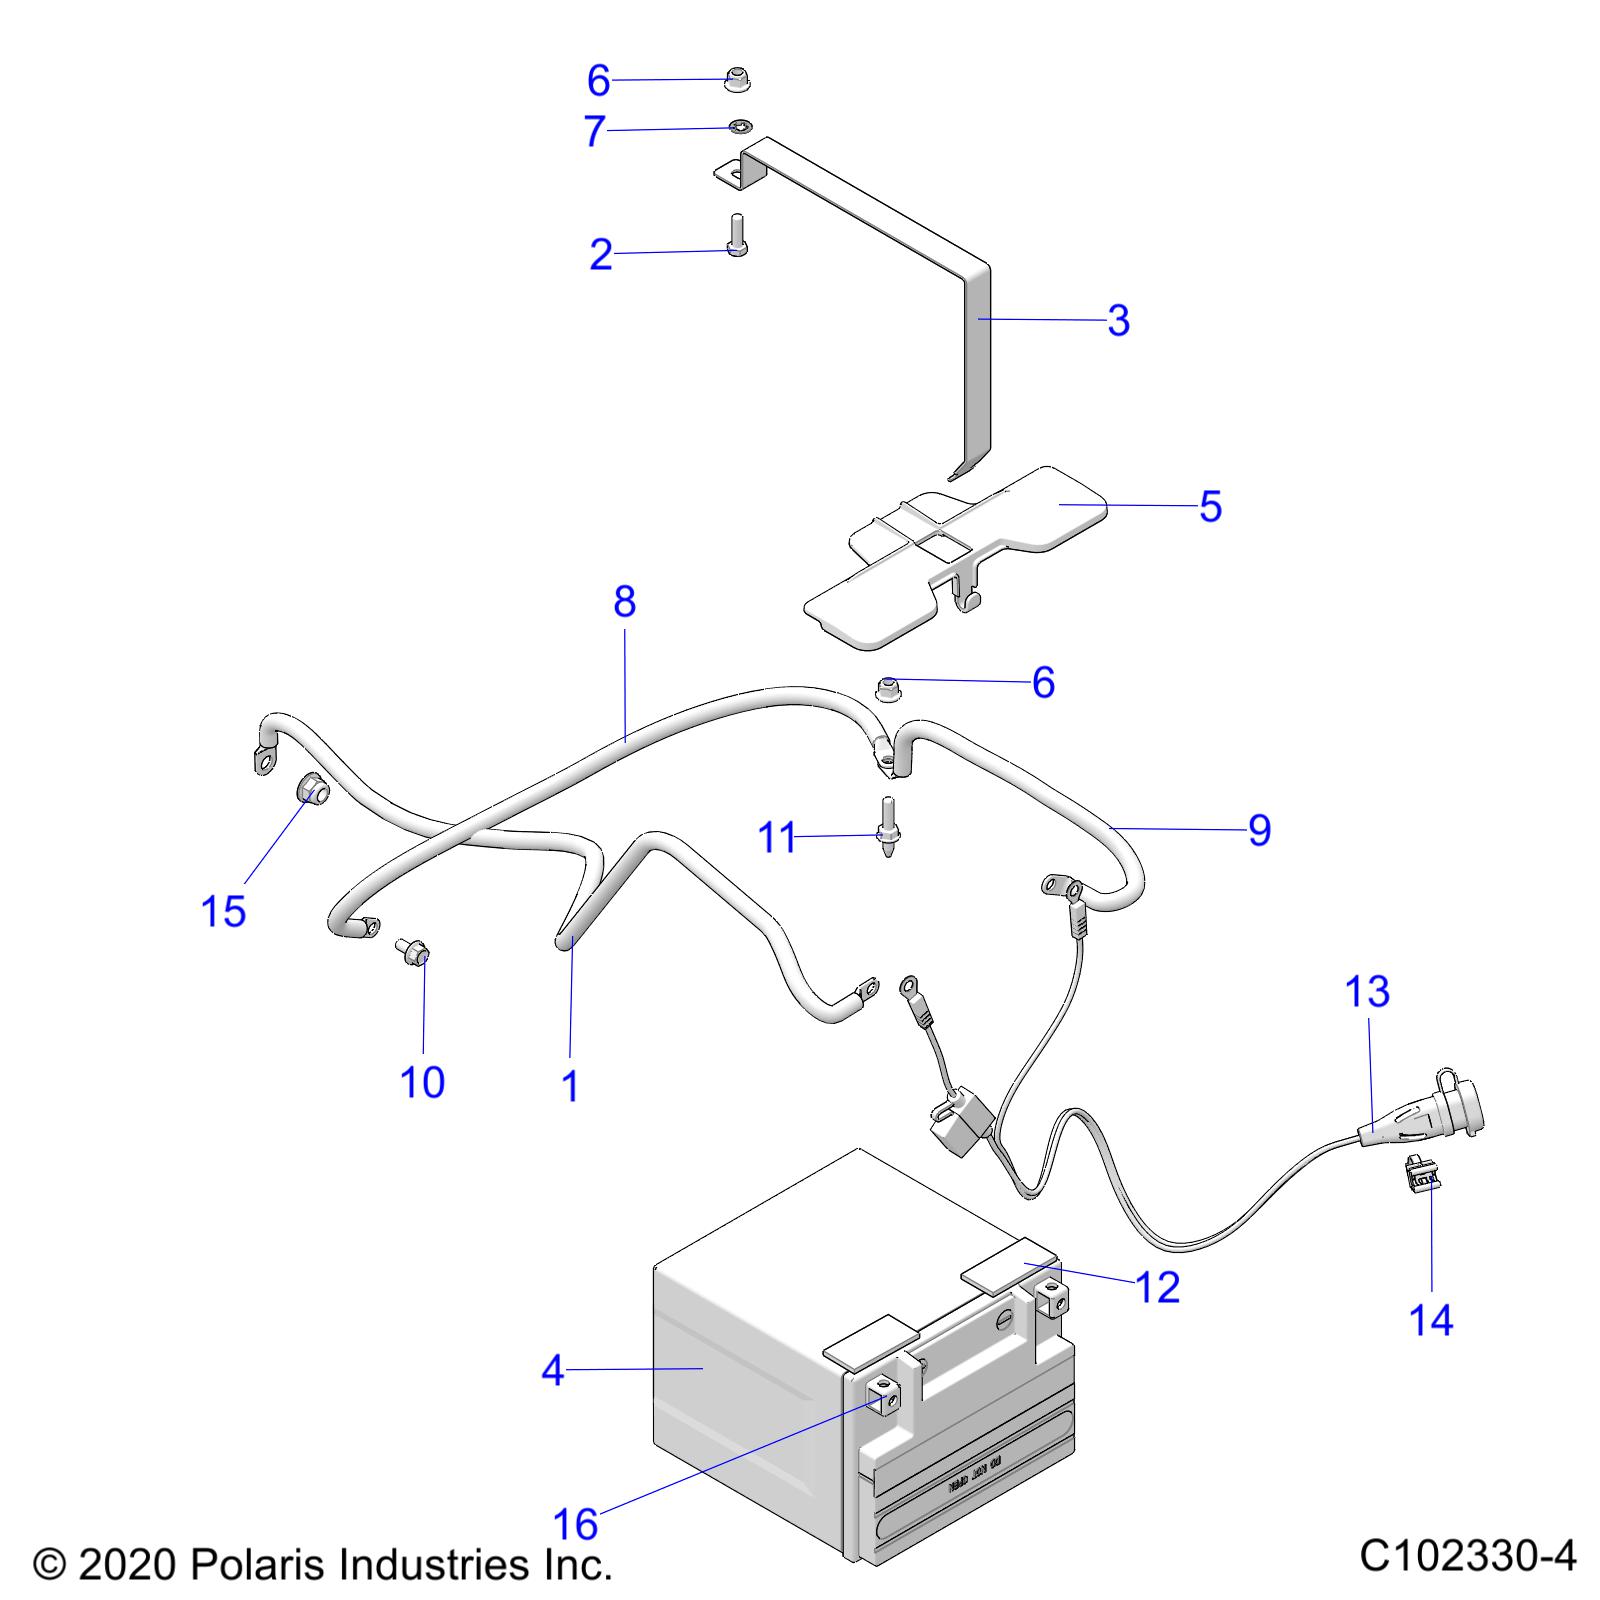 Part Number : 2415060 PLUG-HARNESS BATTERY CHARGE